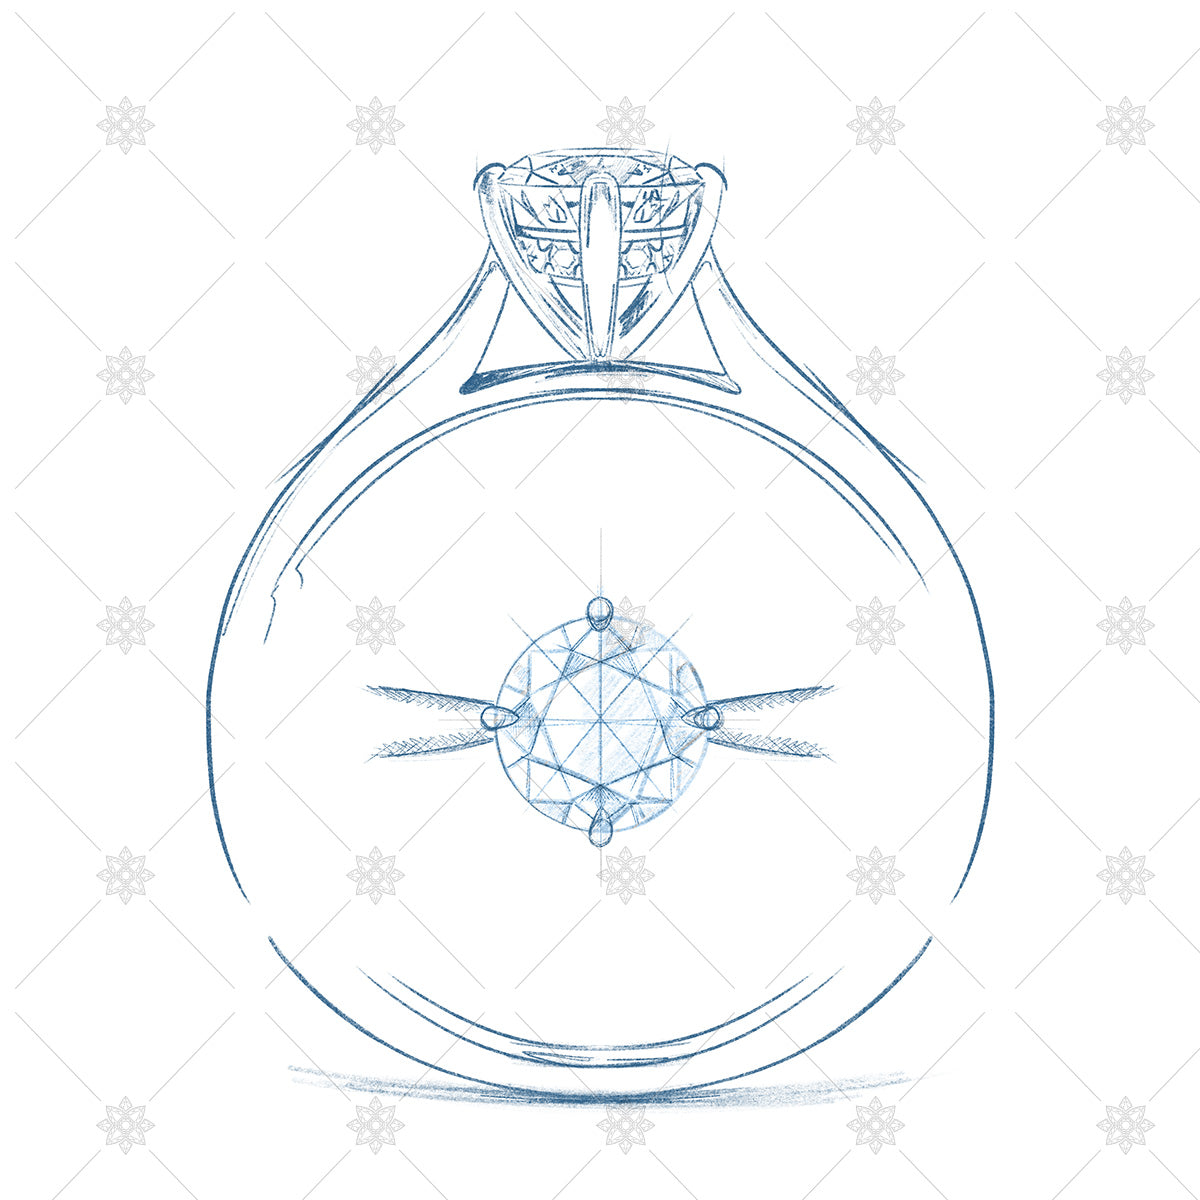 Solitaire Diamond Ring Sketch - SK1048